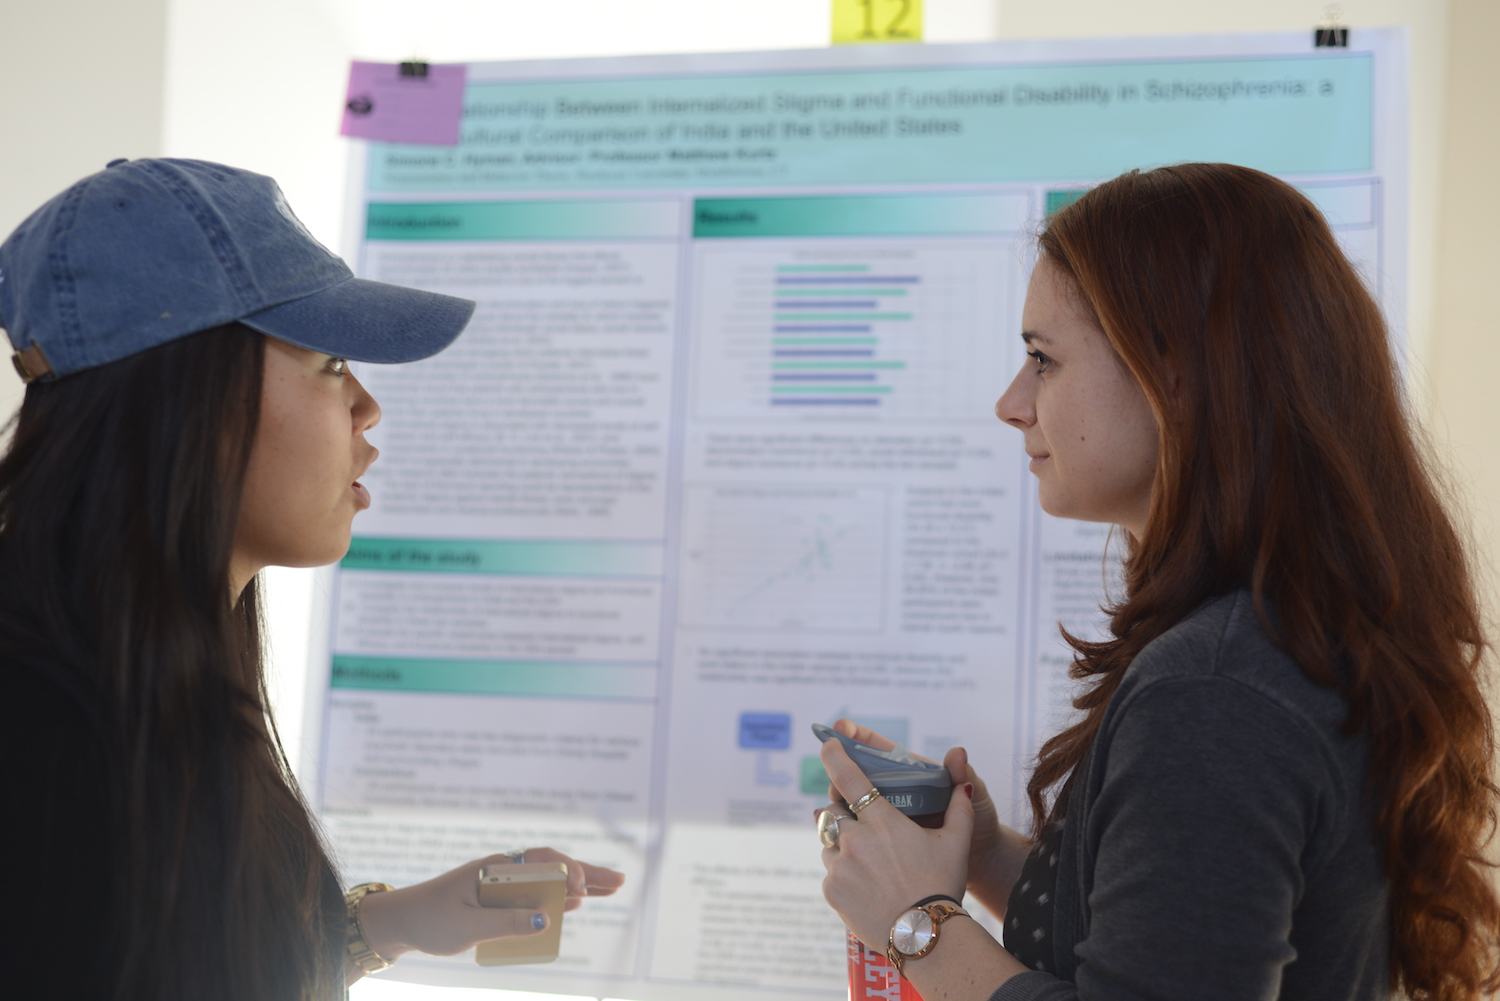 Simone Hyman '15, right, discusses her research on "The Relationship Between Internalized Stigma and Functional Disability in Schizophrenia: A Cross-Cultural Comparison of India and the United States" with another psychology major, Sarah Seo '16.